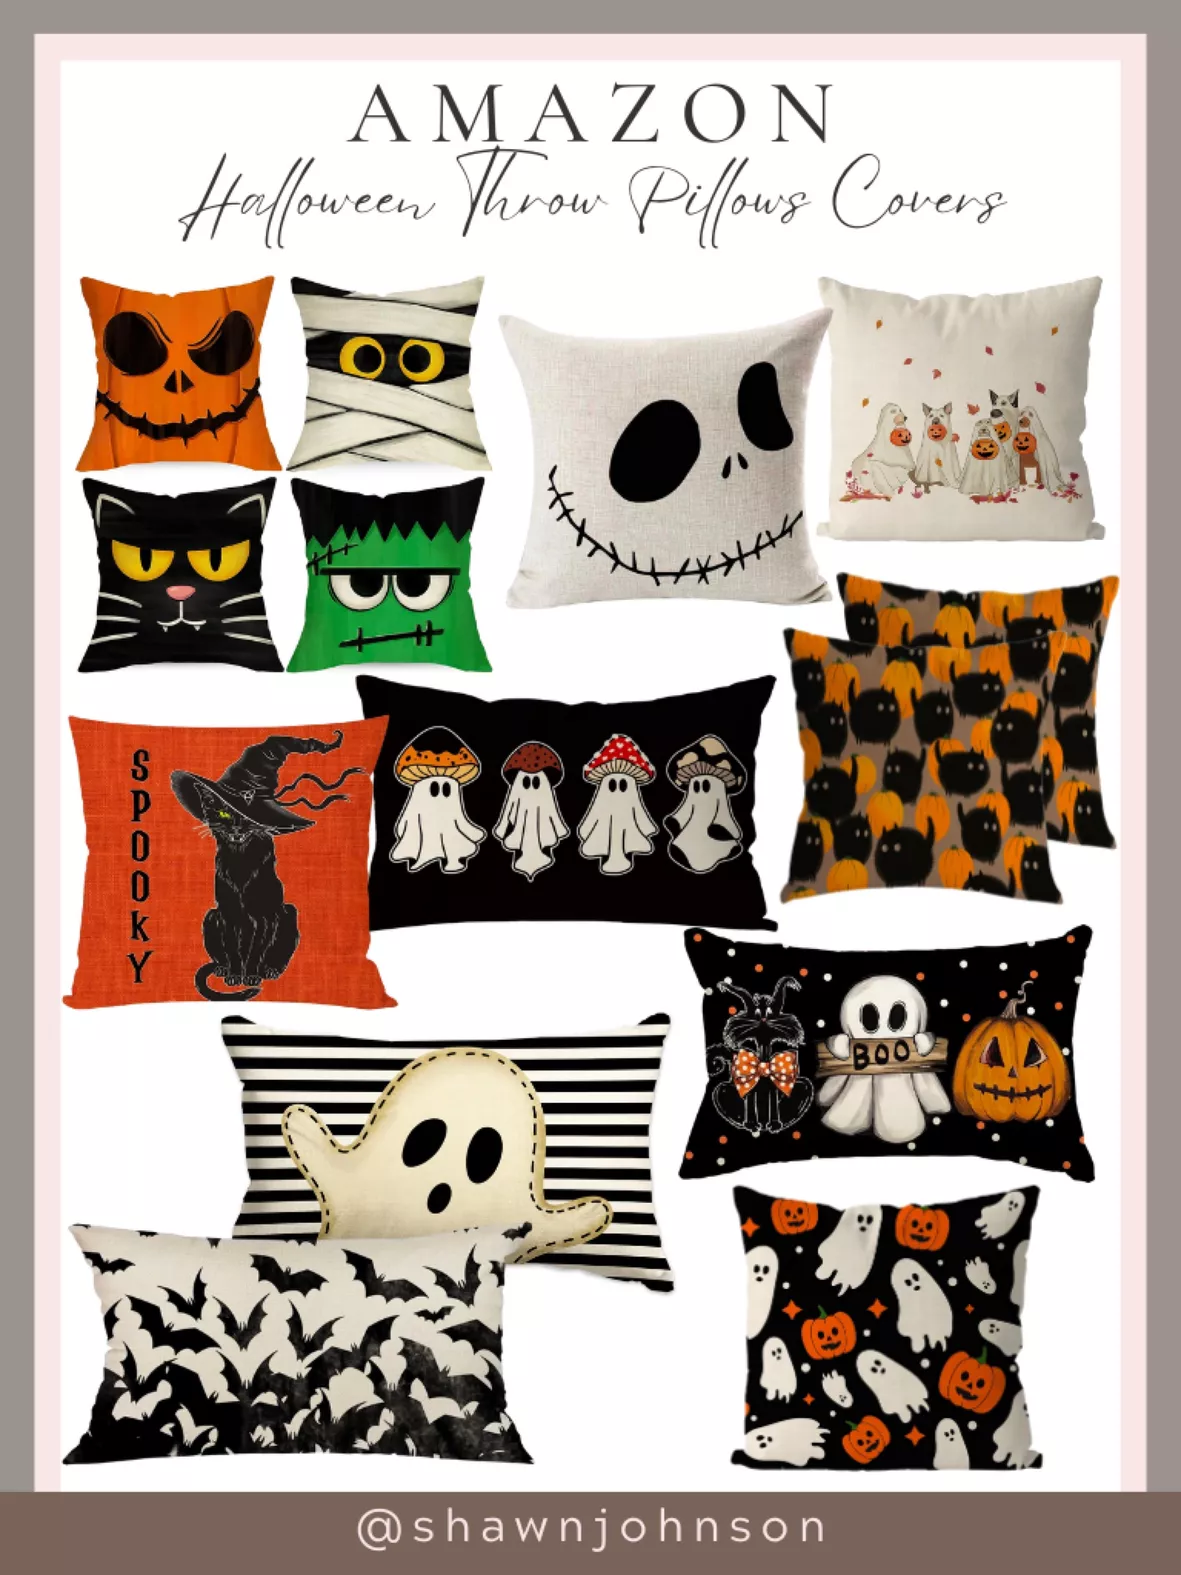 PANDICORN Halloween Pillows Covers 18x18 Set of 4, Black Cat Ghost Can